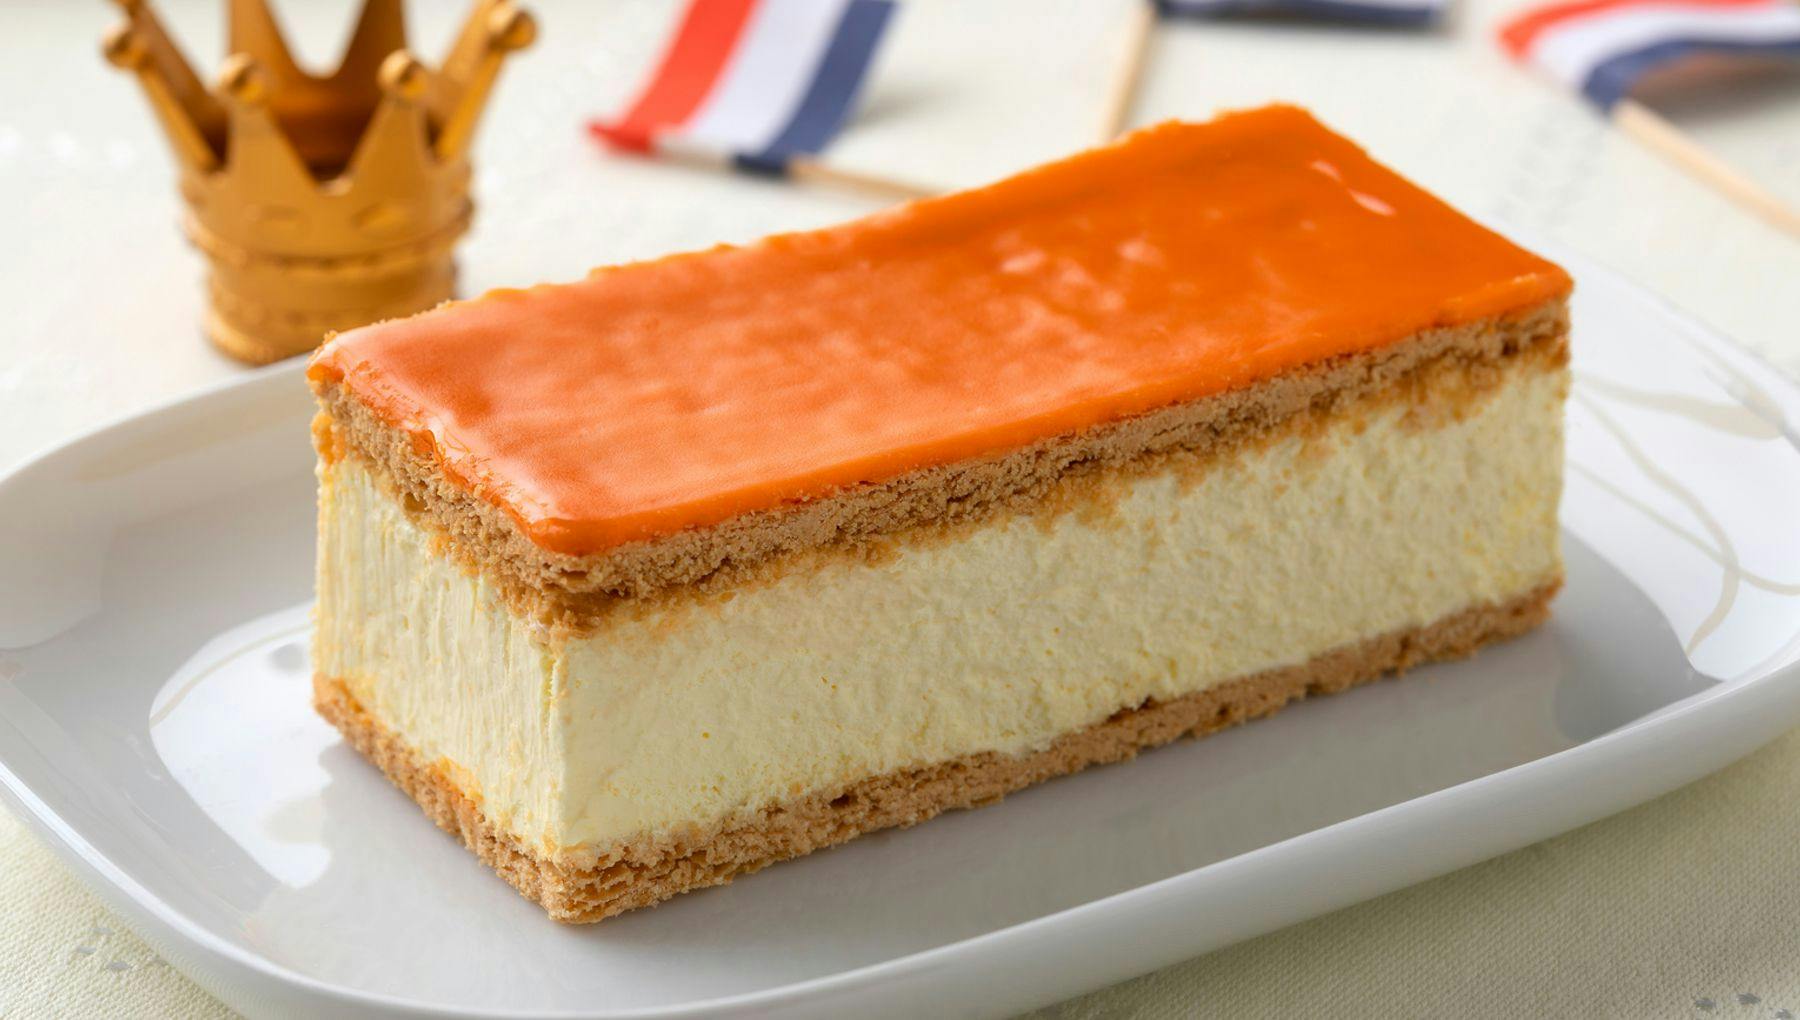 Traditional Dutch orange Tompouce pastry for kings day with crown and flag on the background
1722872101
Typically Dutch foods